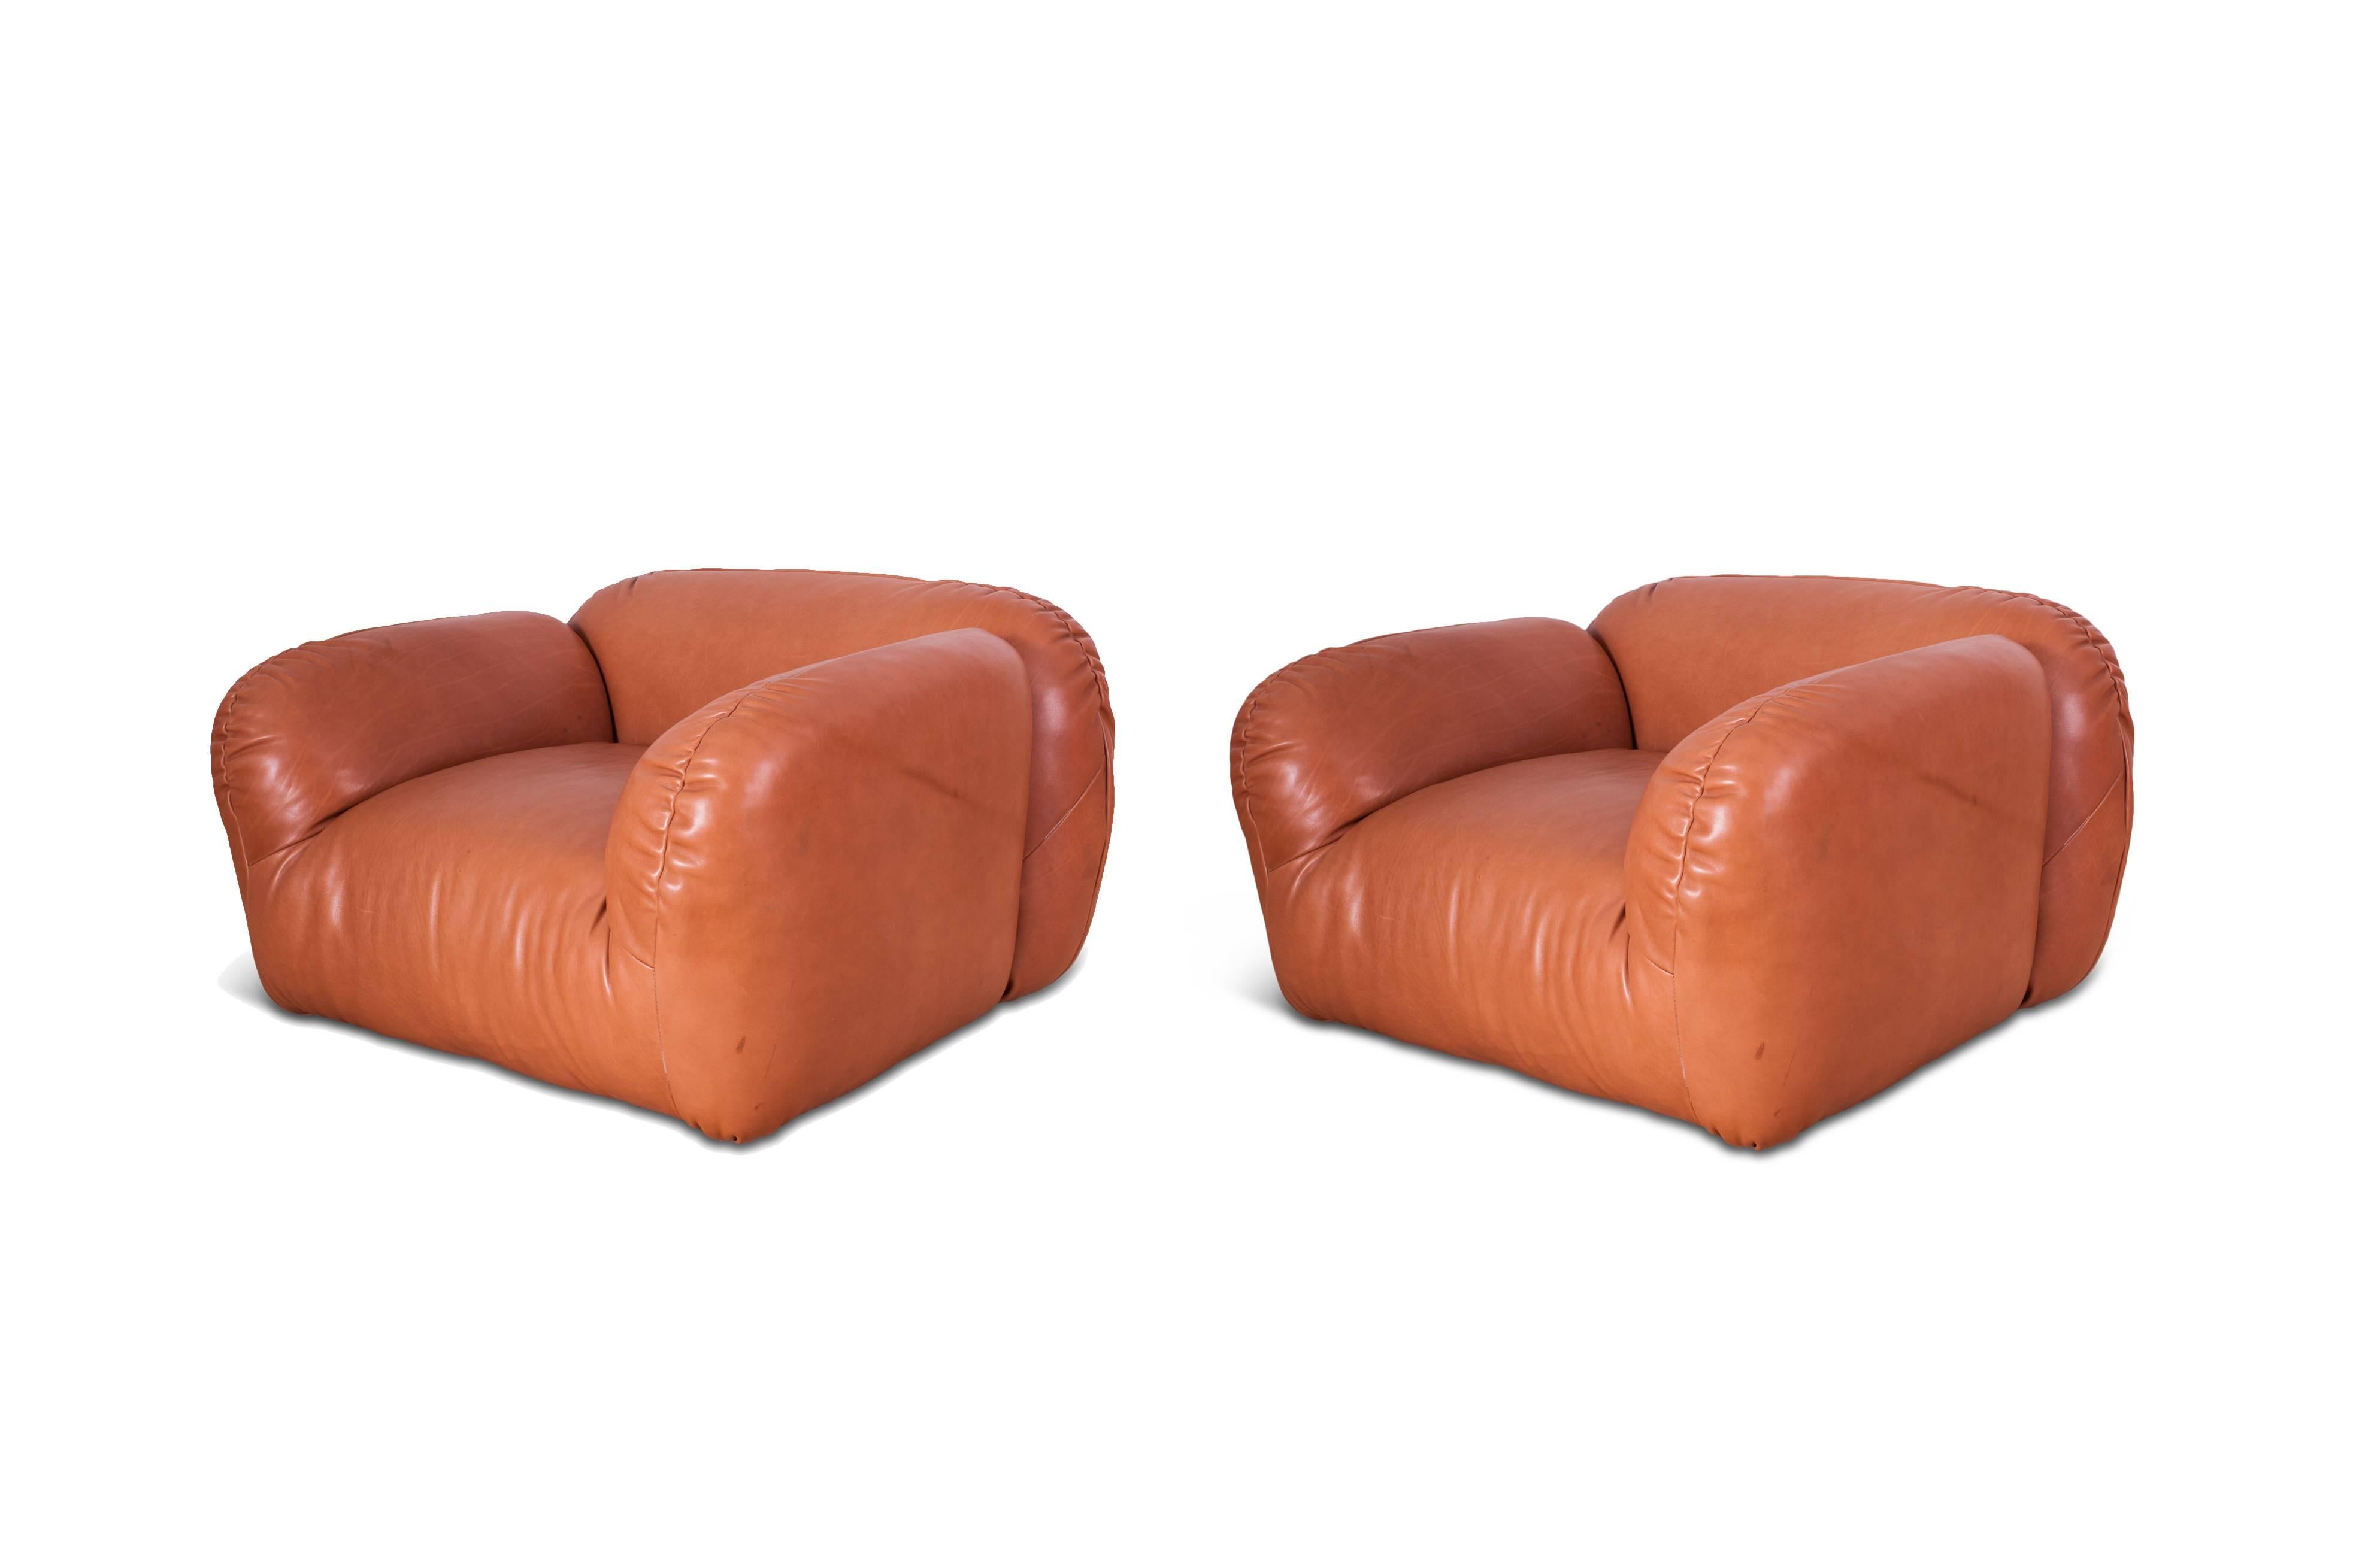 Beautiful pair of Italian club chairs
in wonderful cognac leather

Leather in great condition
providing a most comfortable seat

Italy, 1970s

Measures: H 65 x W 115 x D 110 cm x SH.
 